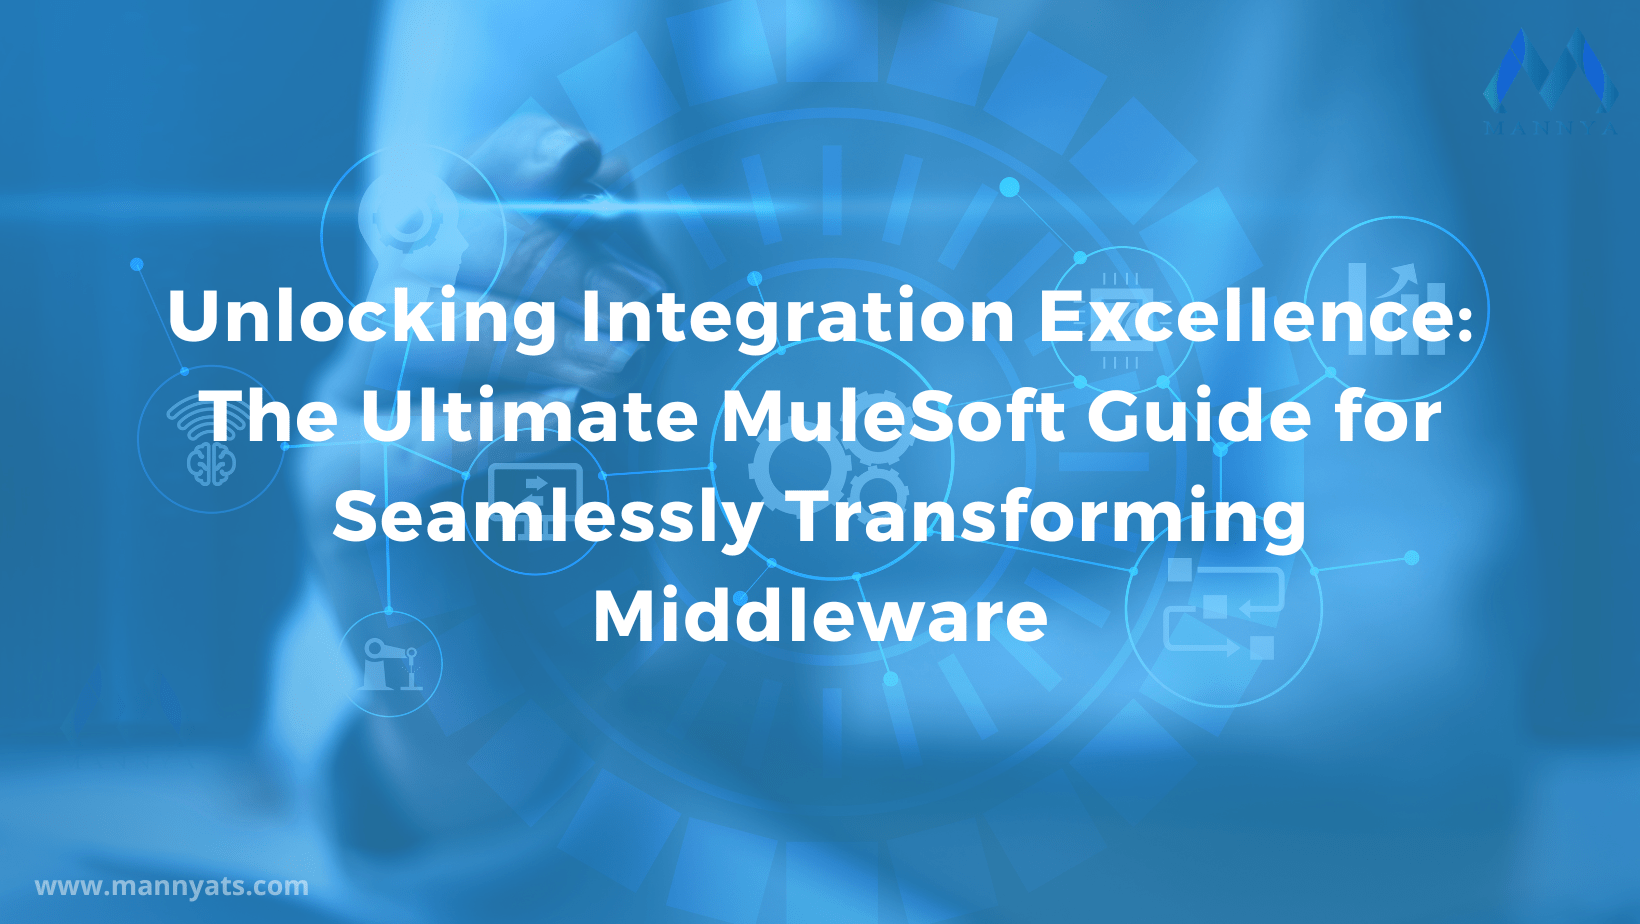 Unlocking Integration Excellence: The Ultimate MuleSoft Guide for Seamlessly Transforming Middleware